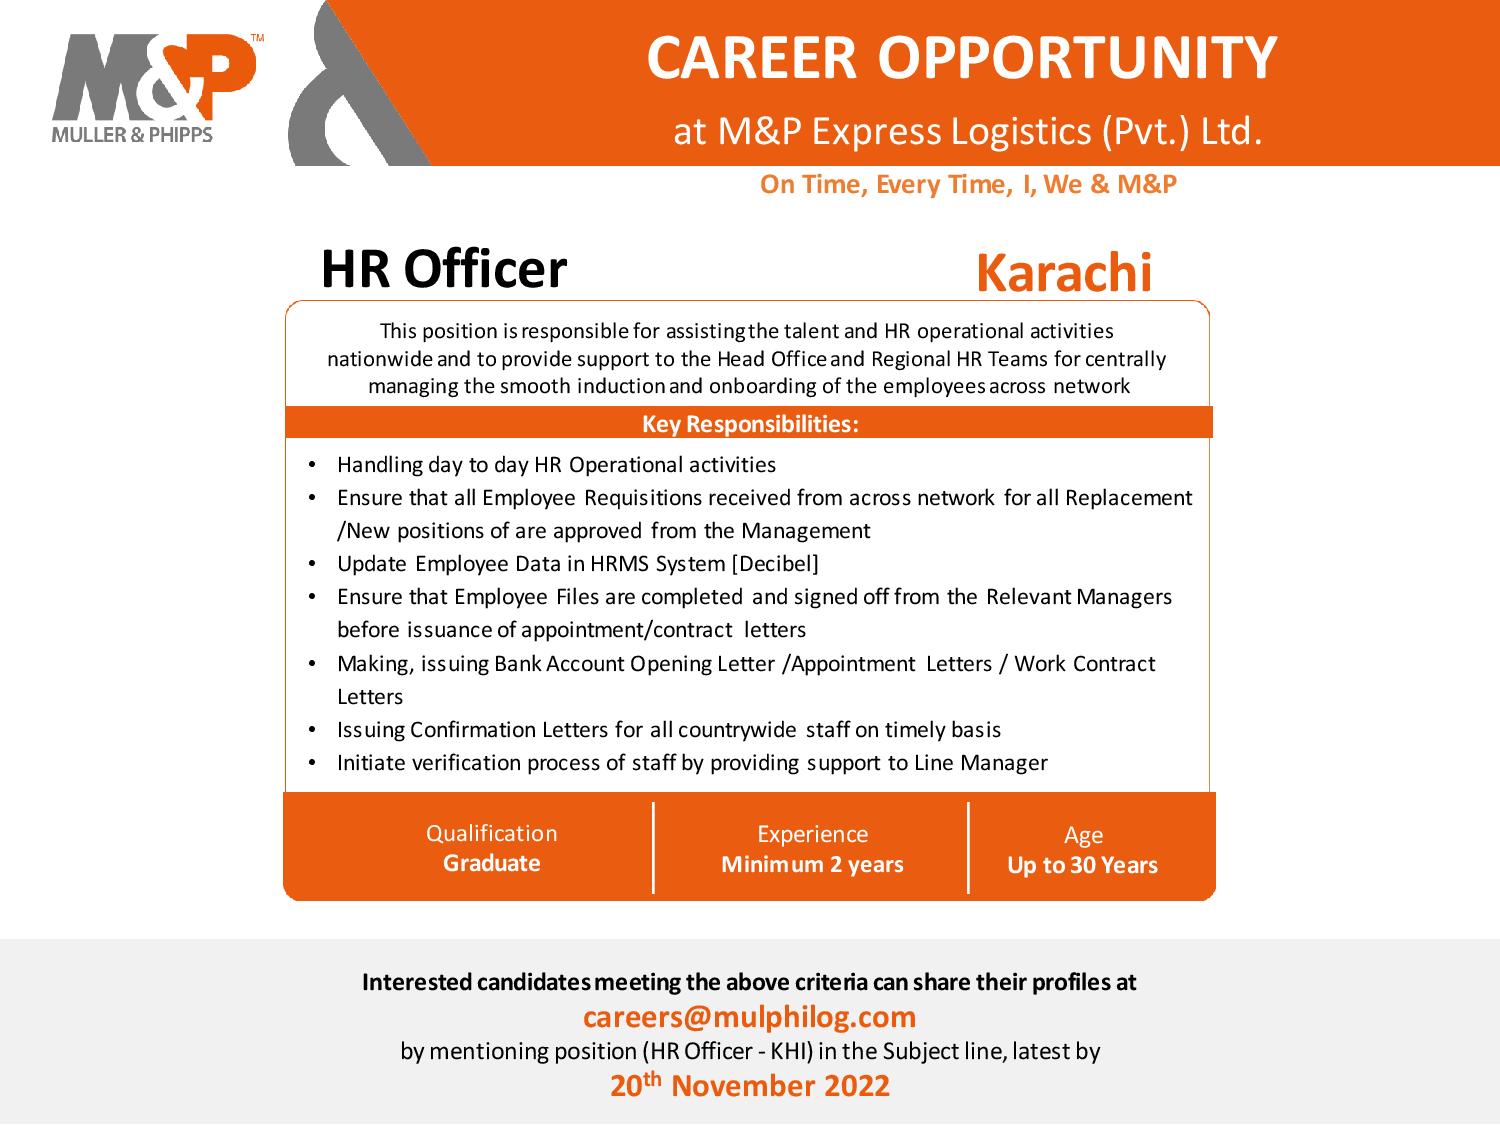 HR Officer opportunity at M&P Express Logistics